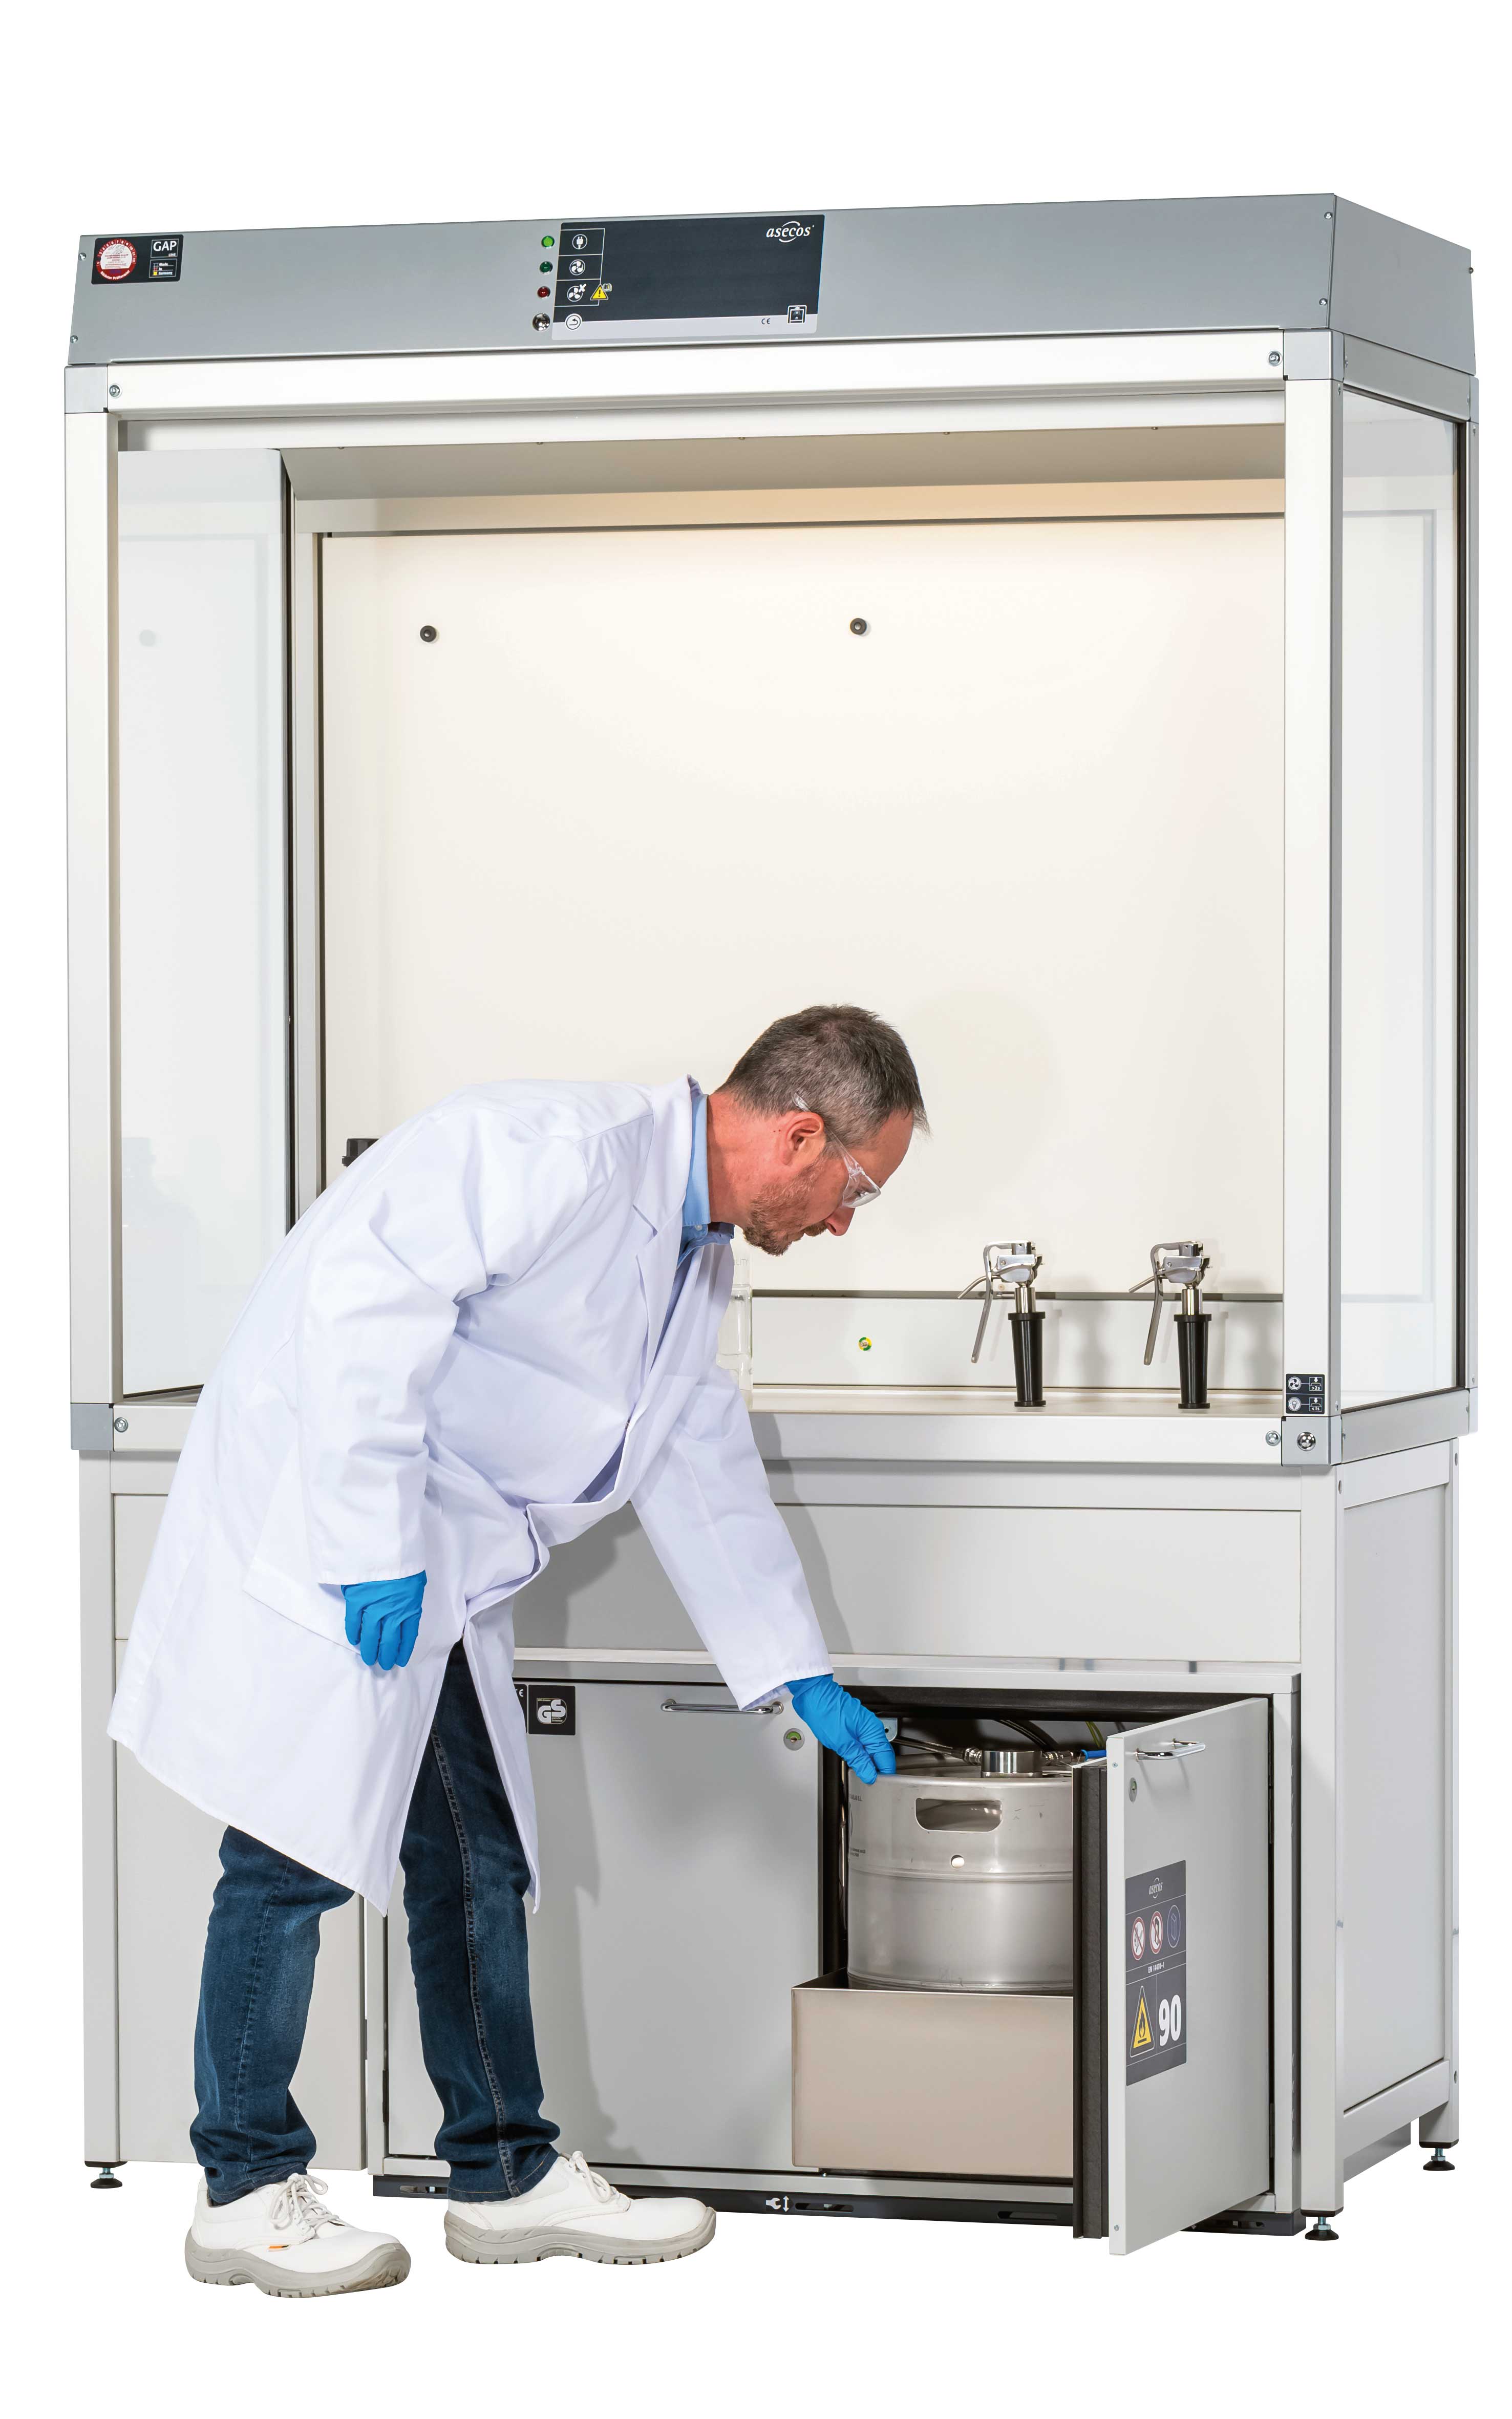 Solvent dispensing system or waste collection for suction hoods